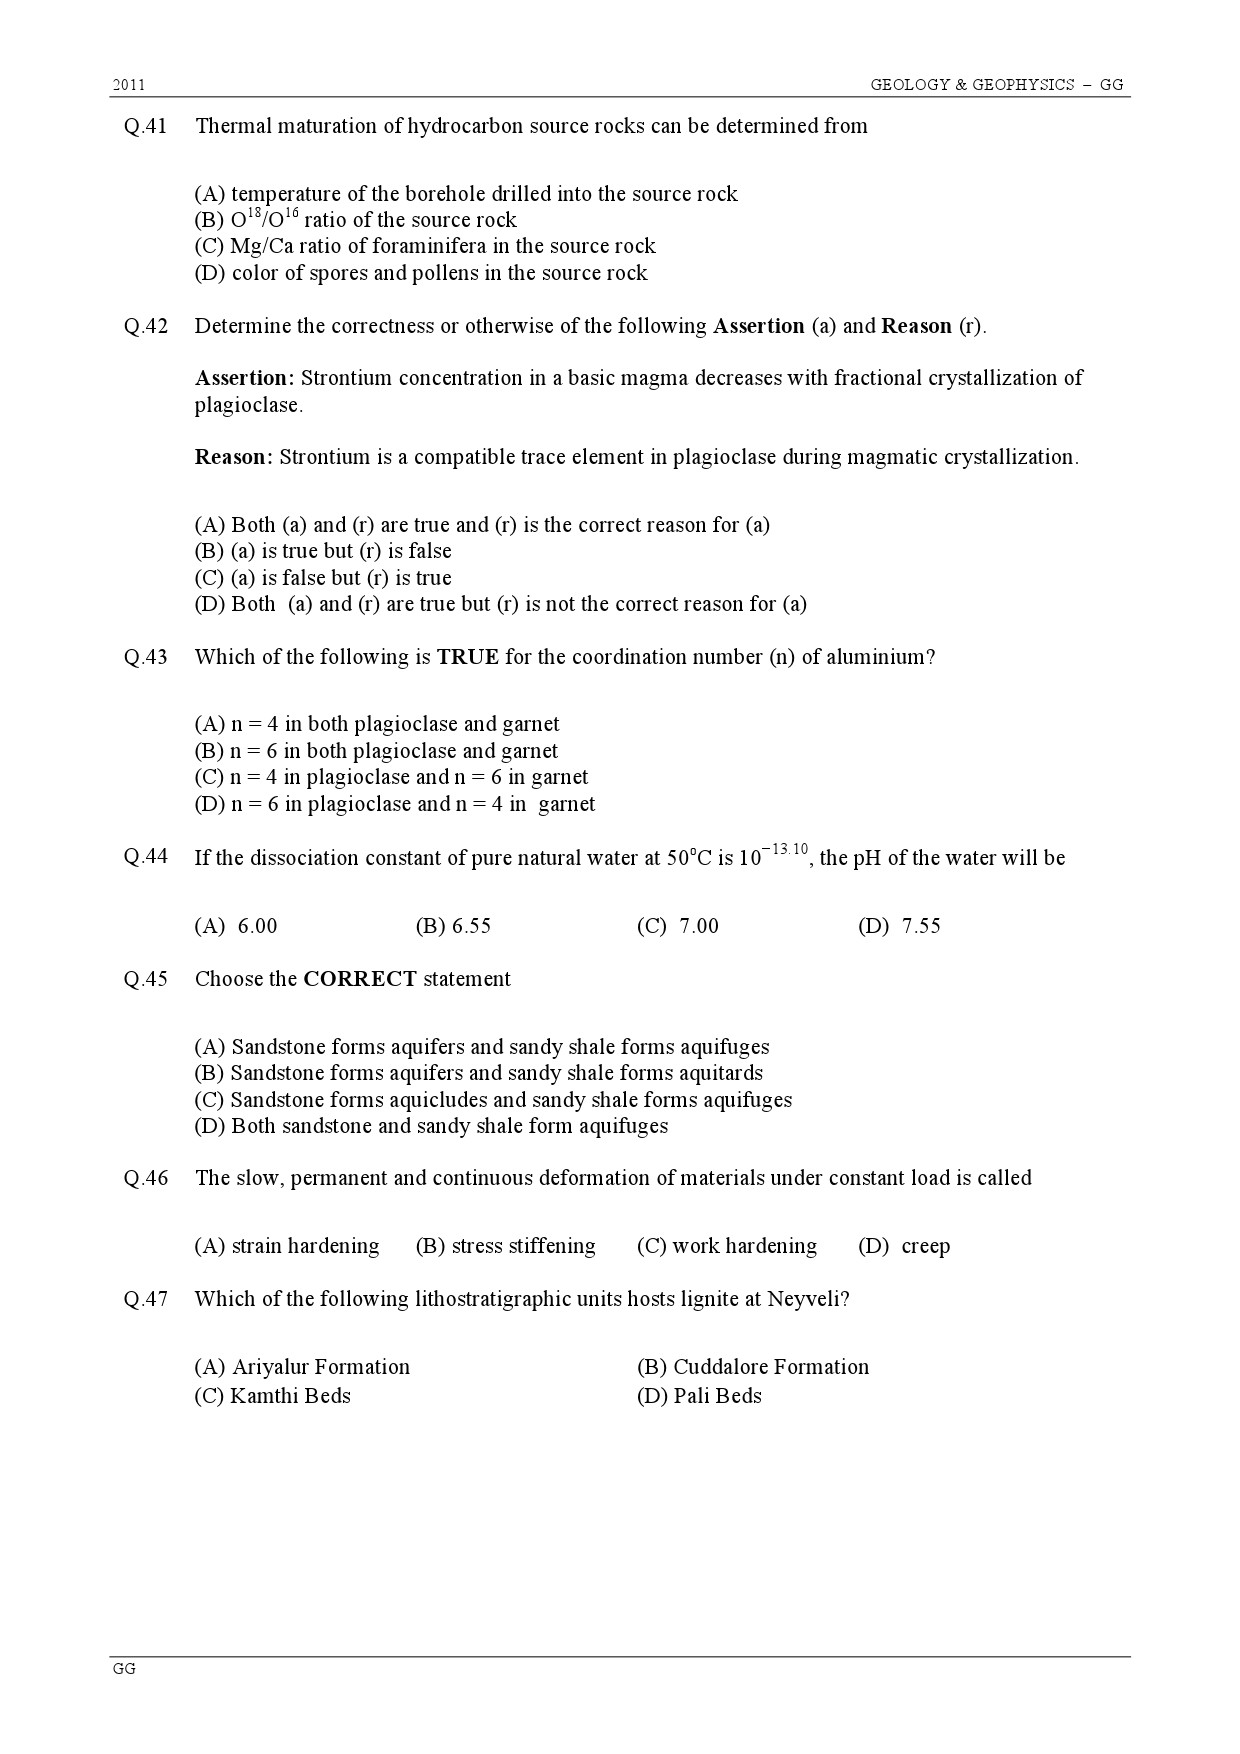 GATE Exam Question Paper 2011 Geology and Geophysics 8